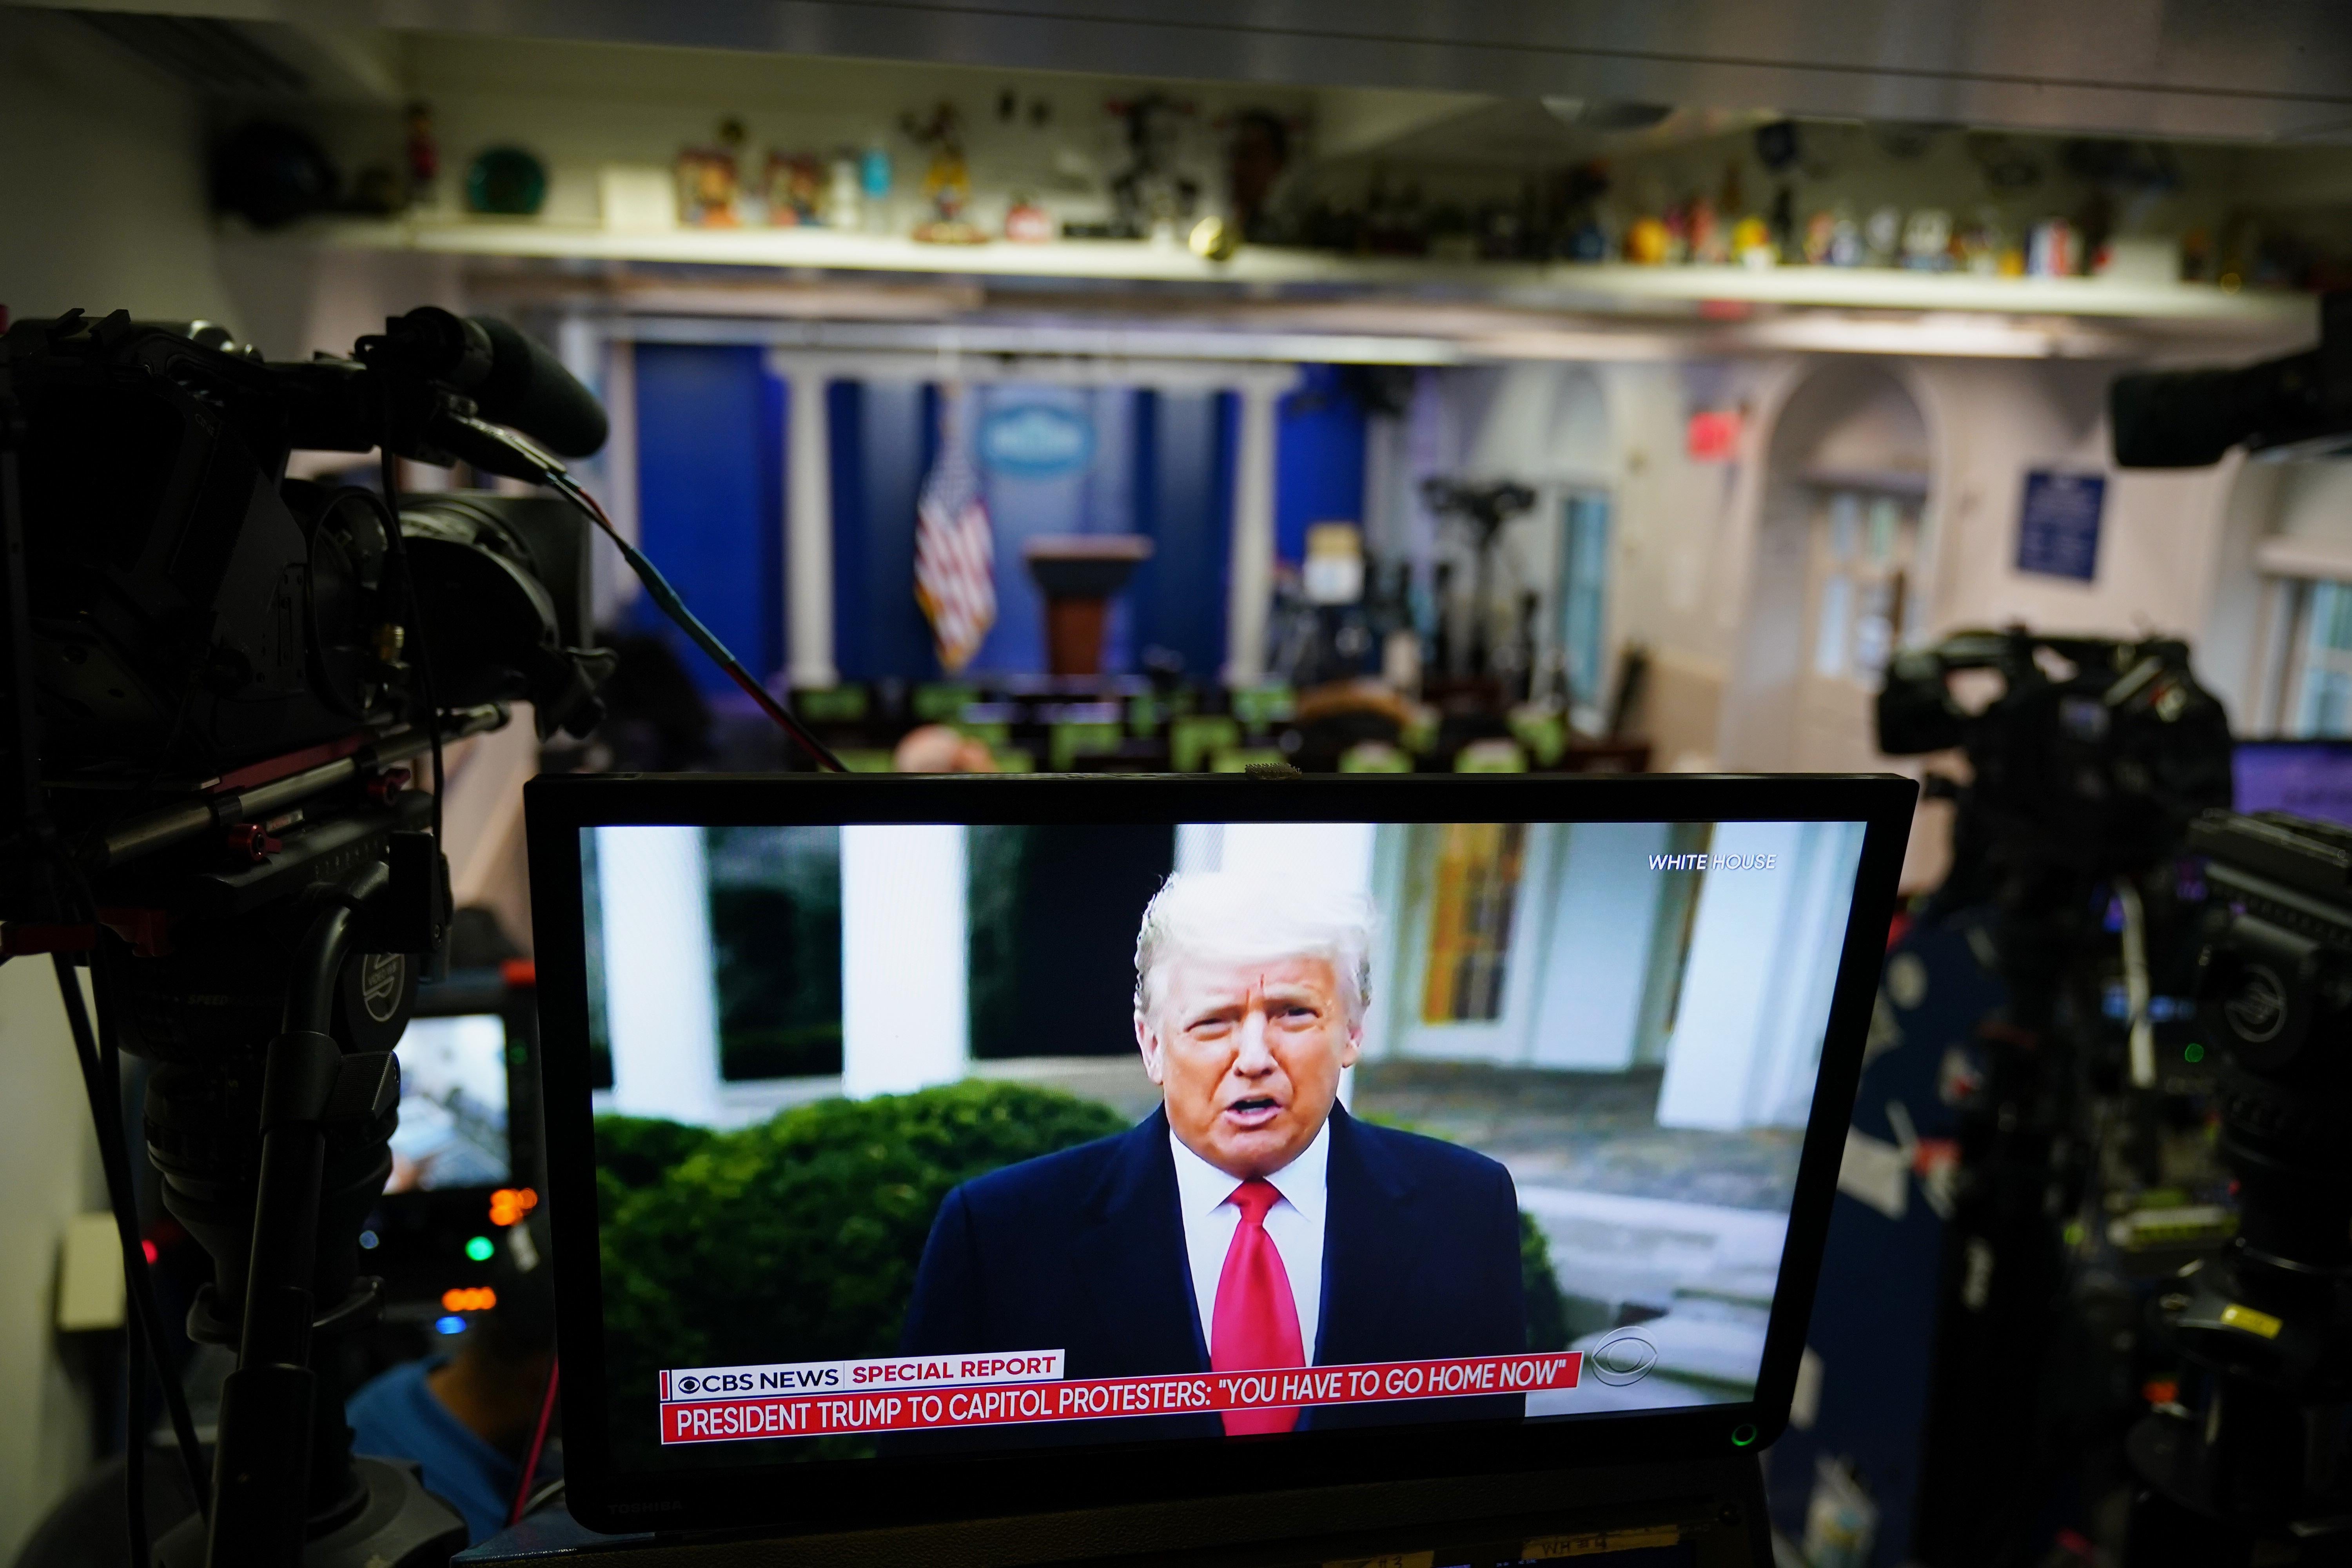 A TV screen at the rear of the White House press room shows Donald Trump speaking.